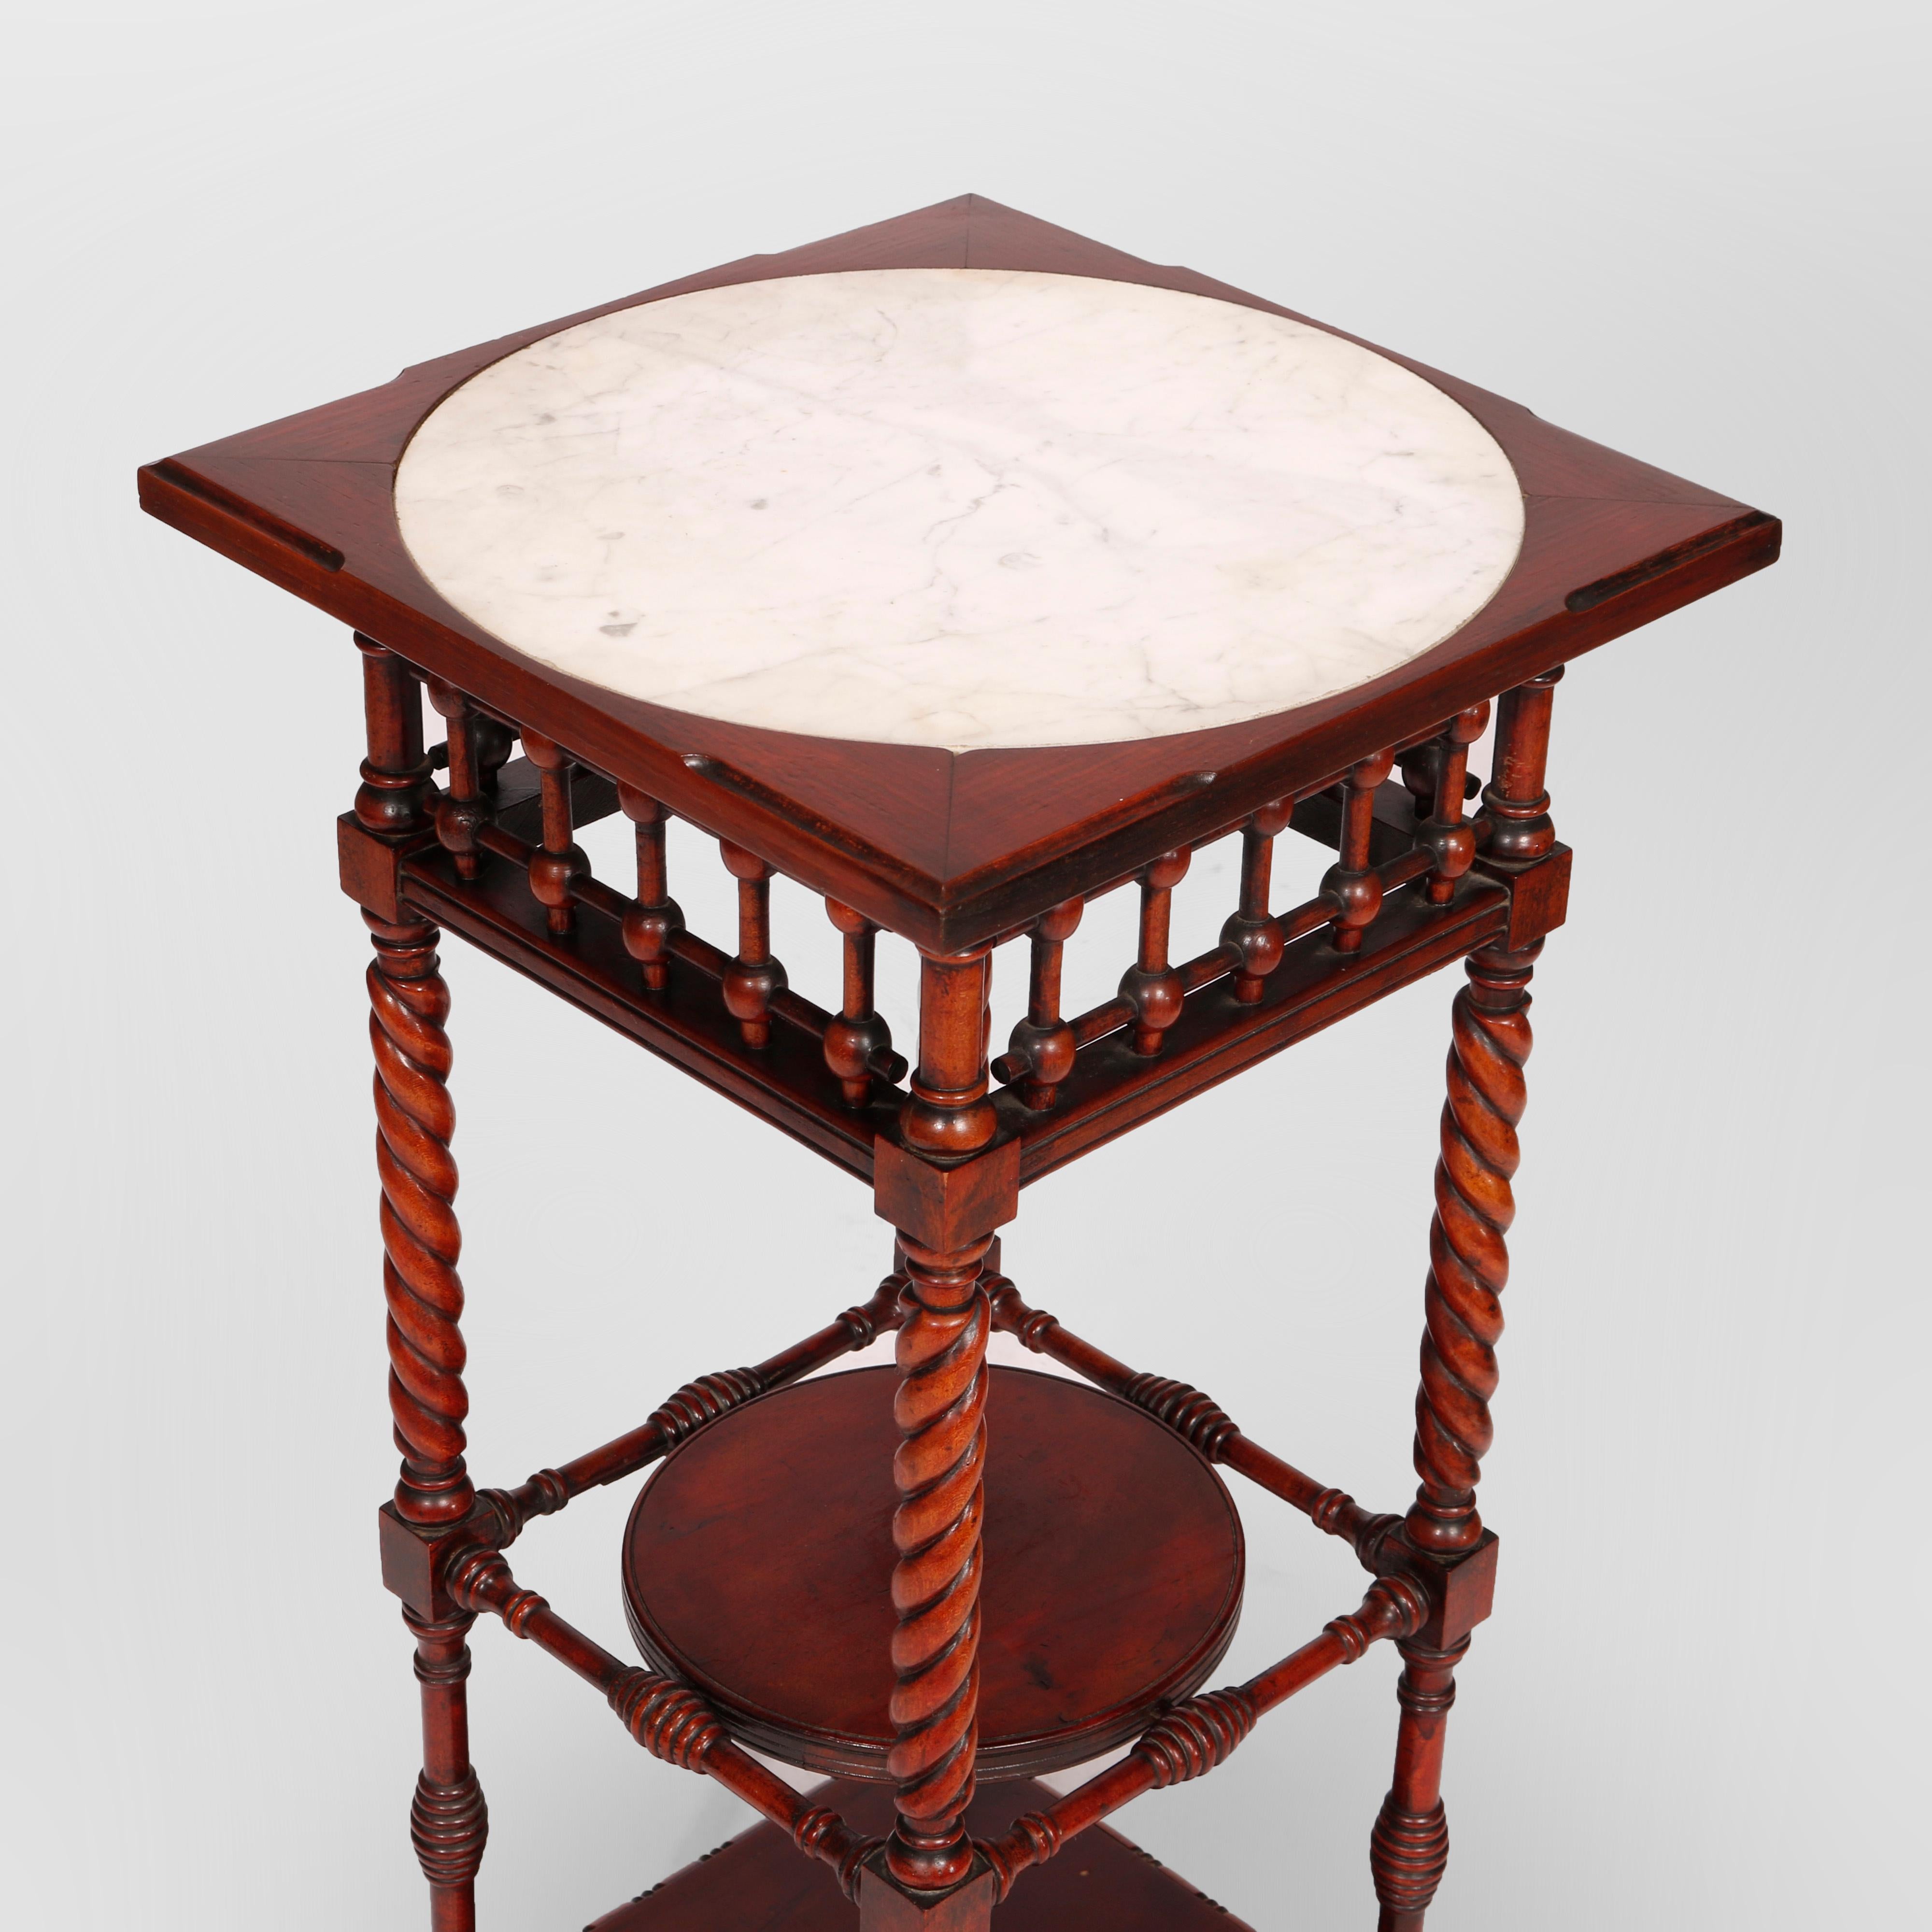 20th Century Antique Aesthetic Movement Mahogany Stick & Ball Side Table & Inset Marble c1900